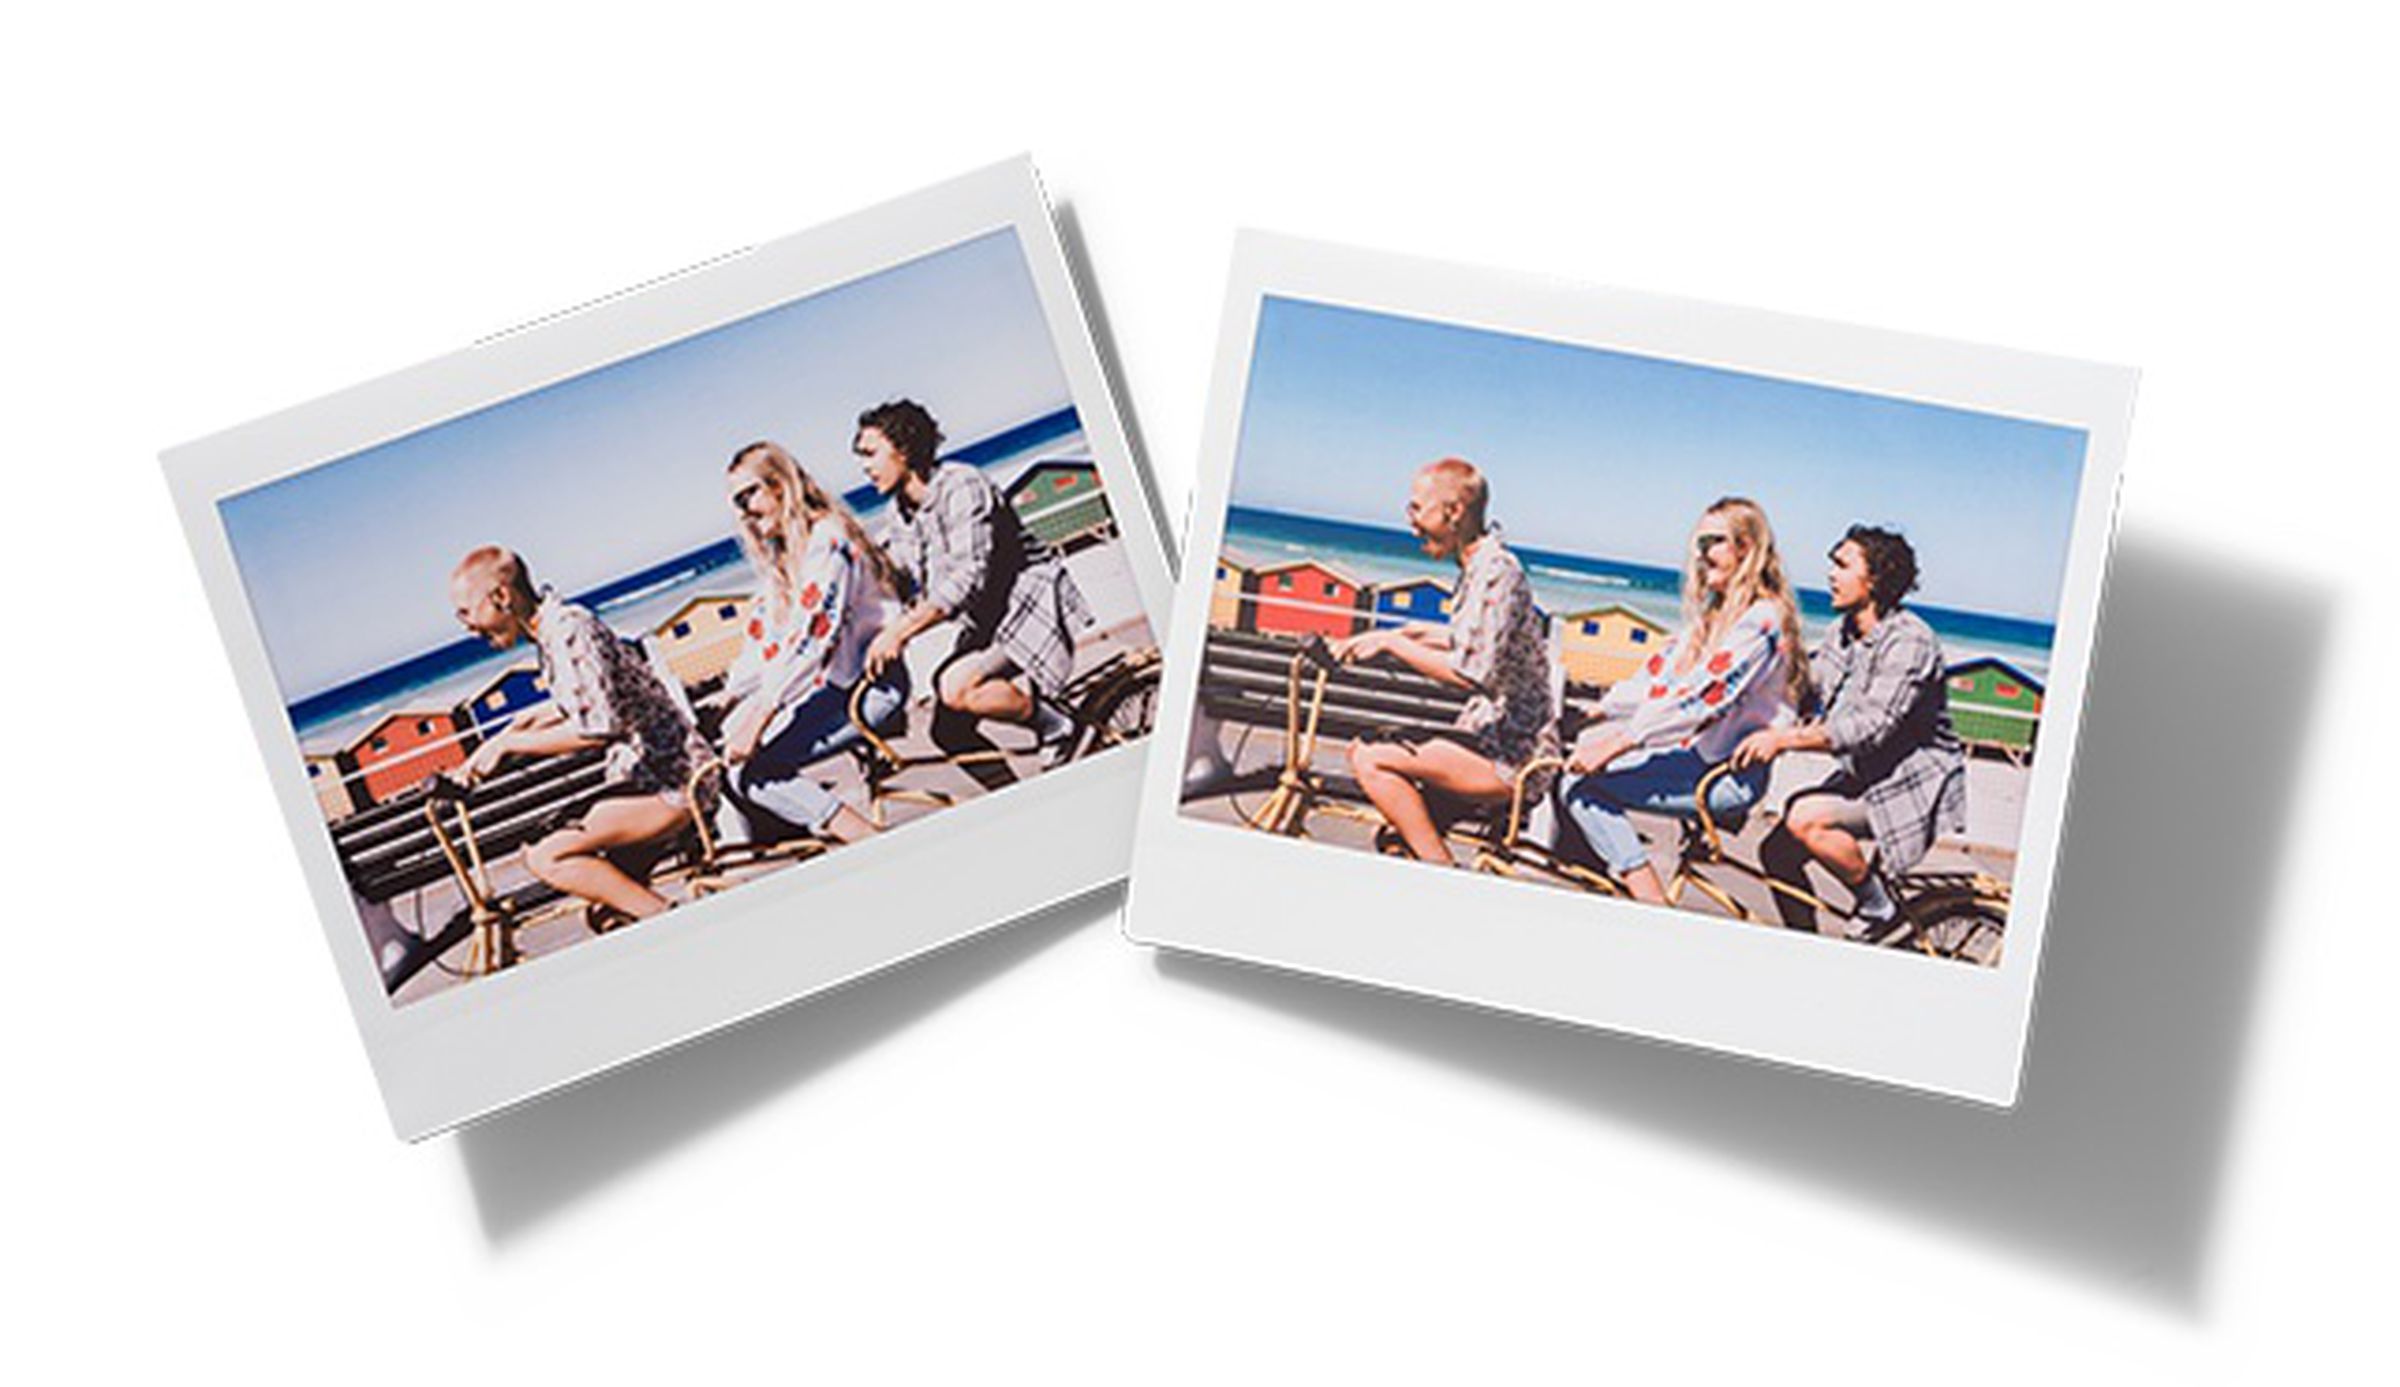 The Instax Link Wide’s Rich and Natural color modes.